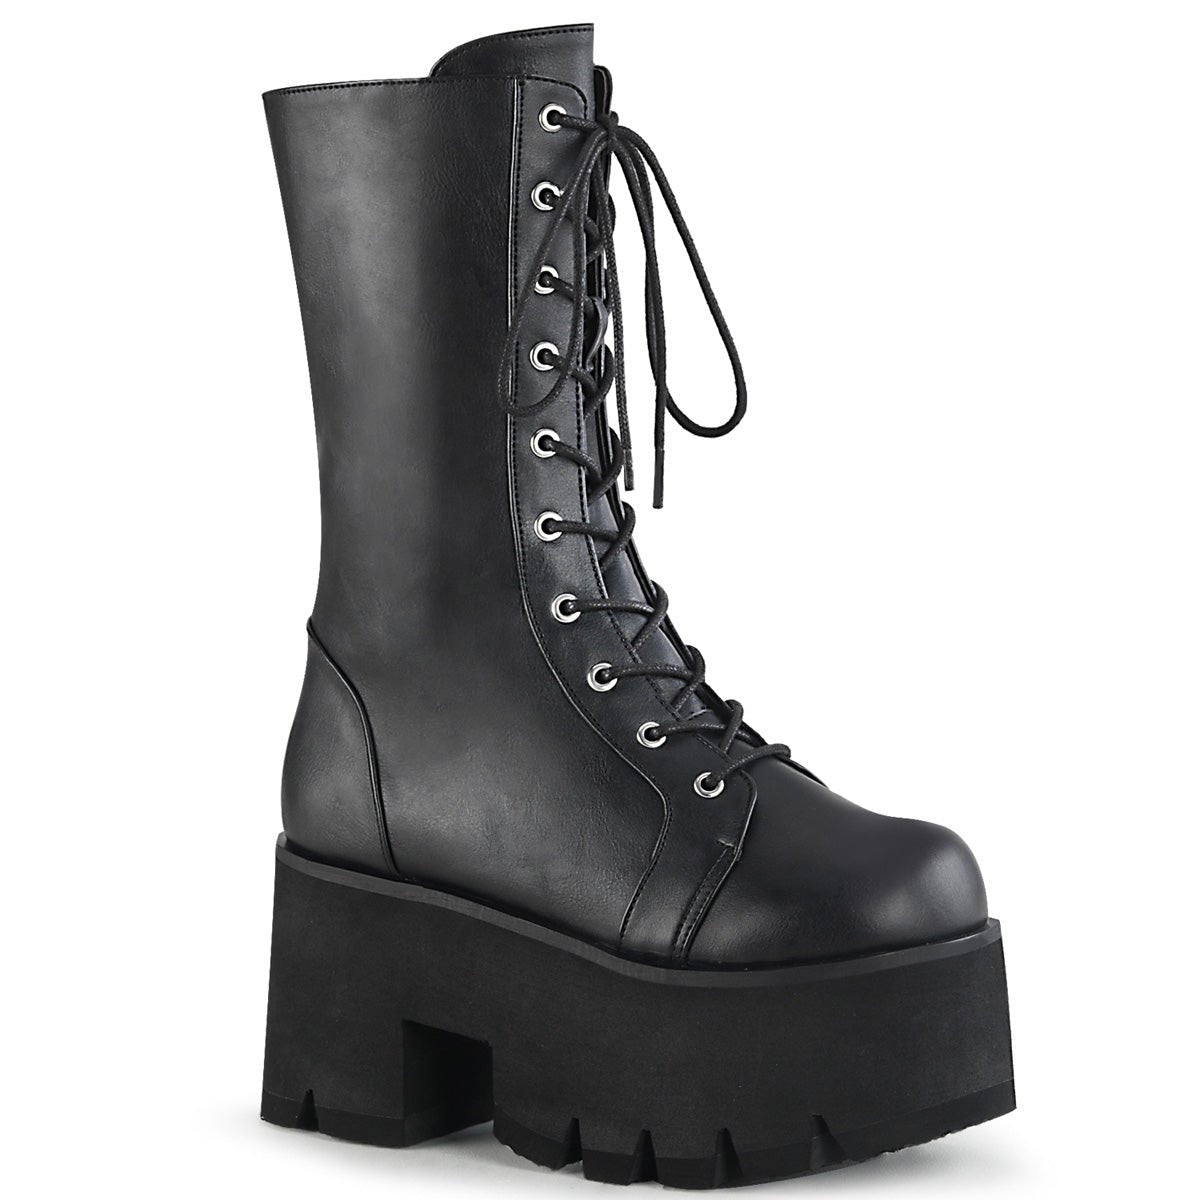 Too Fast | Demonia Ashes 105 | Black Vegan Leather Women's Mid Calf Boots